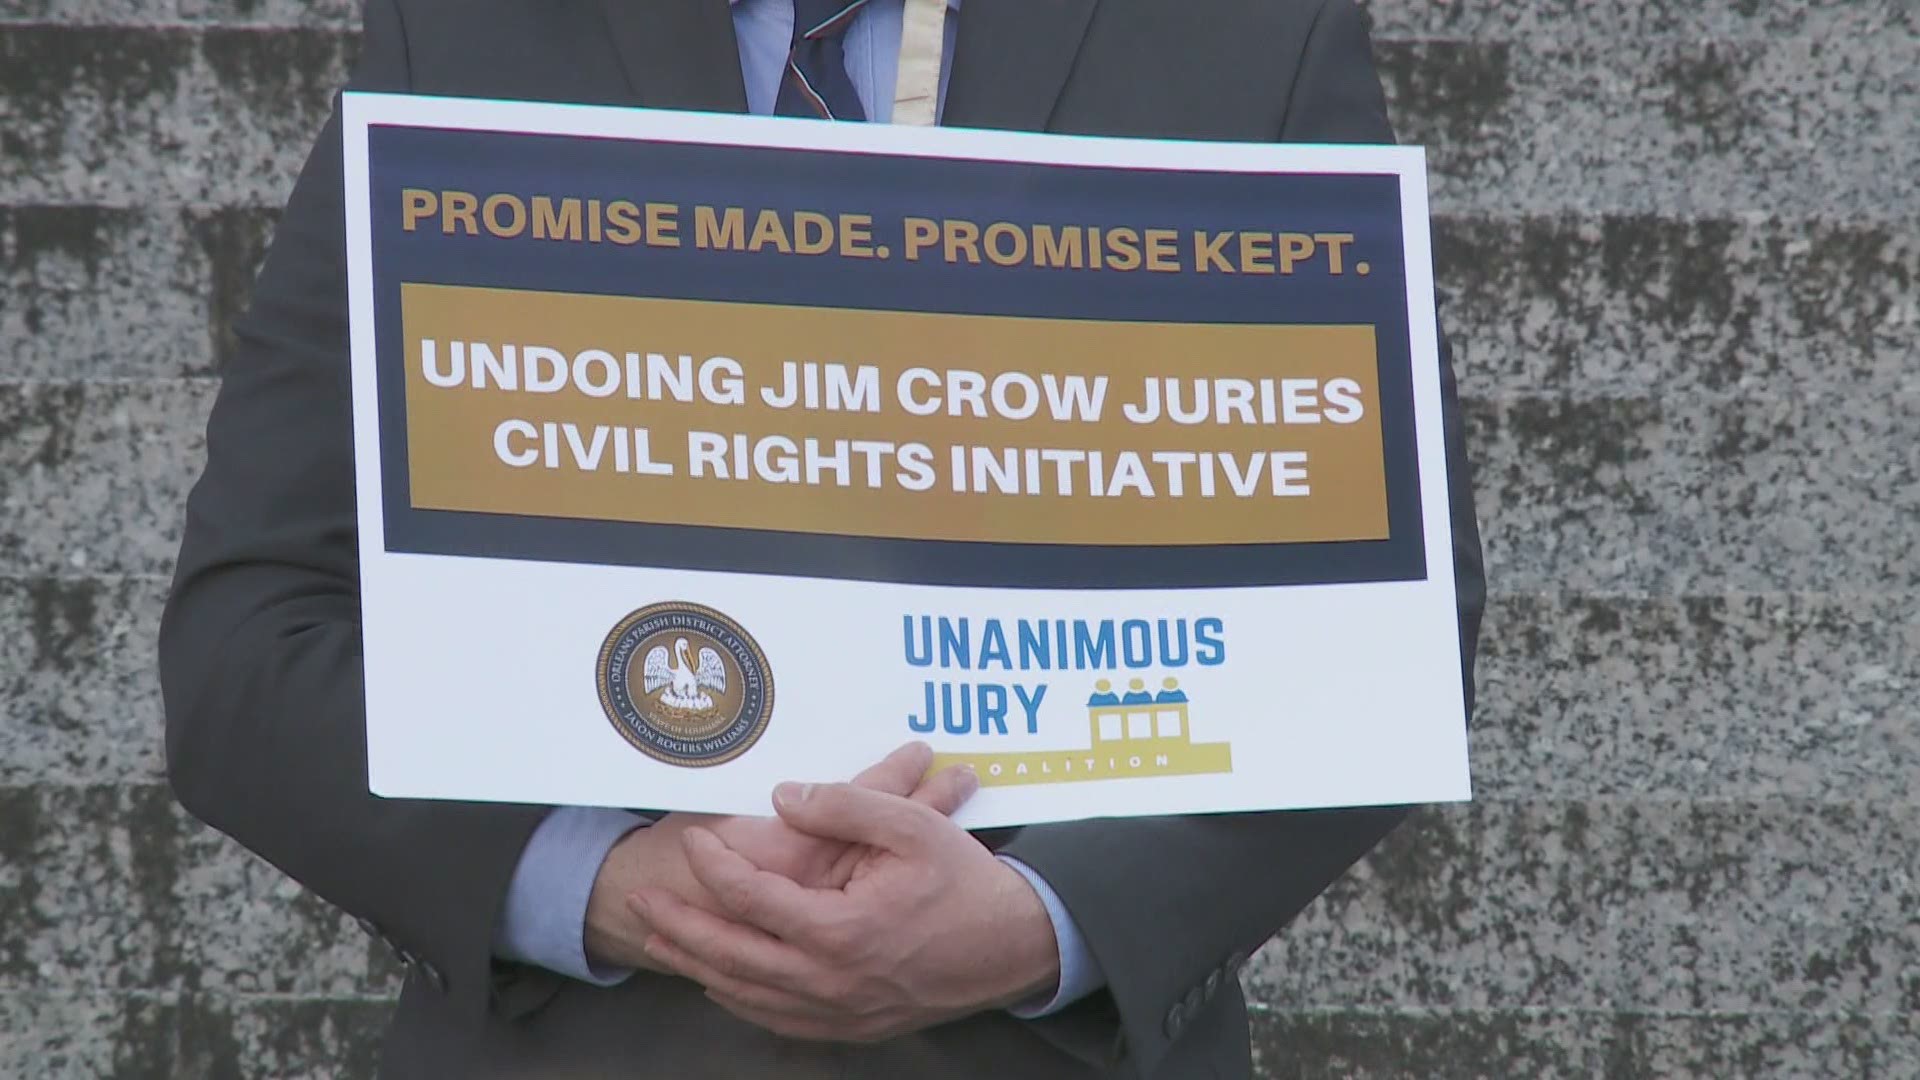 DA Jason Williams' new initiative is aimed at overturning cases with split juries that lead to wrongful convictions.